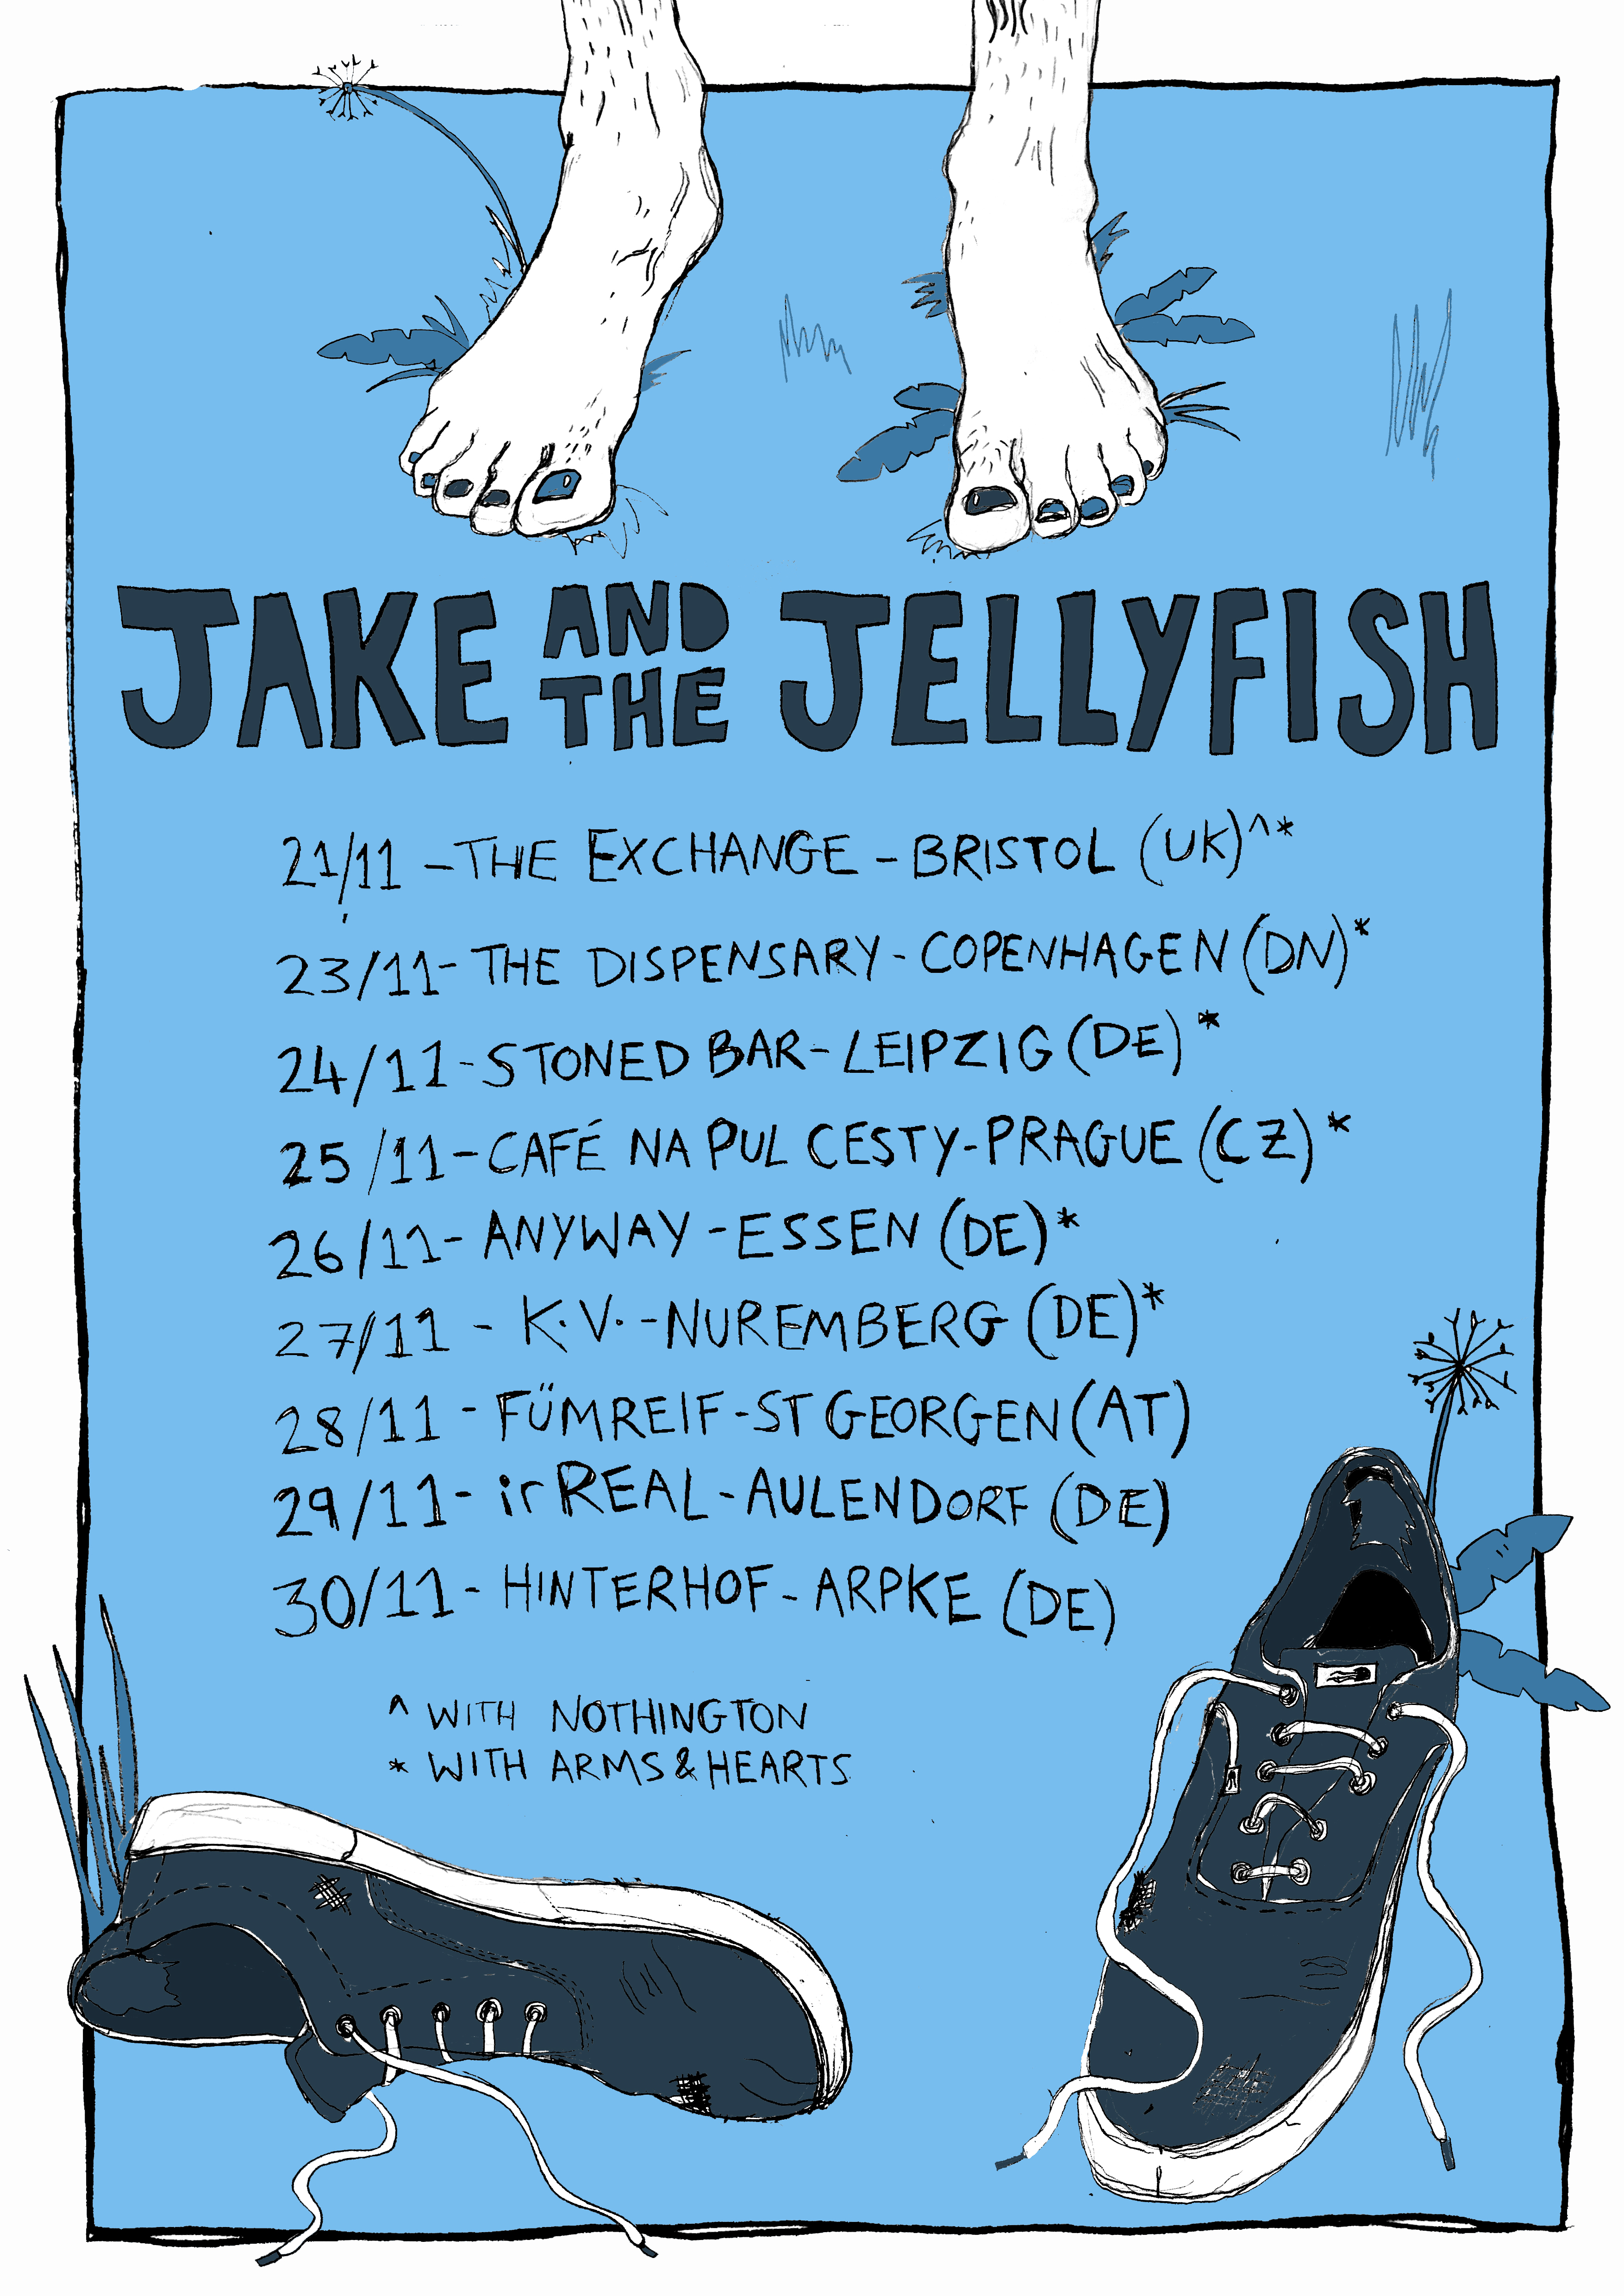 Jake & the Jellyfish + Arms & Hearts